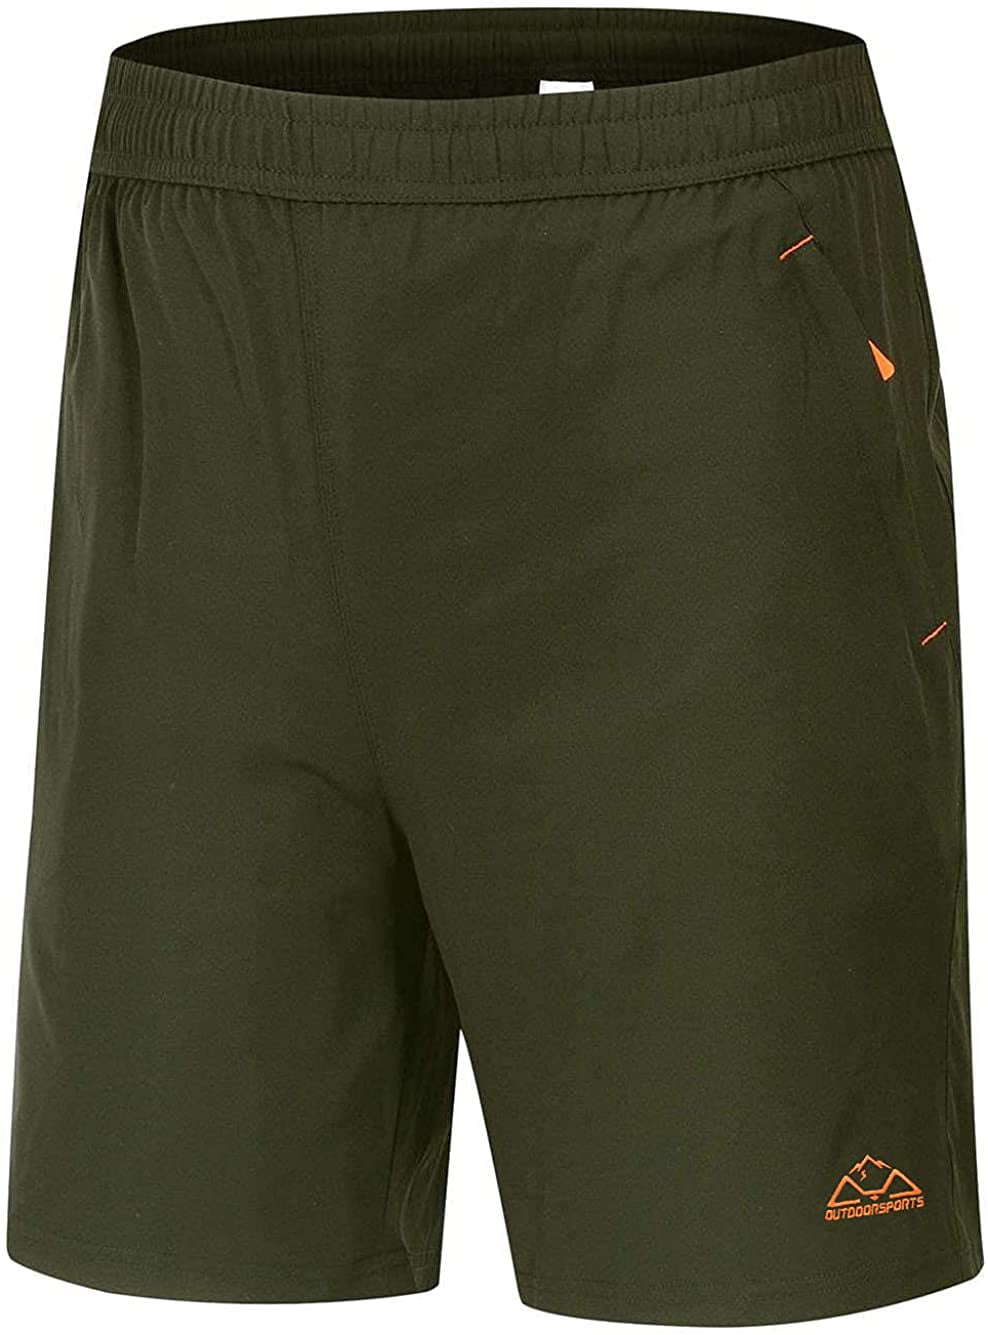 TBMPOY Mens 7 Quick Dry Active Running Workout Shorts with Mesh Liner Zip Pockets